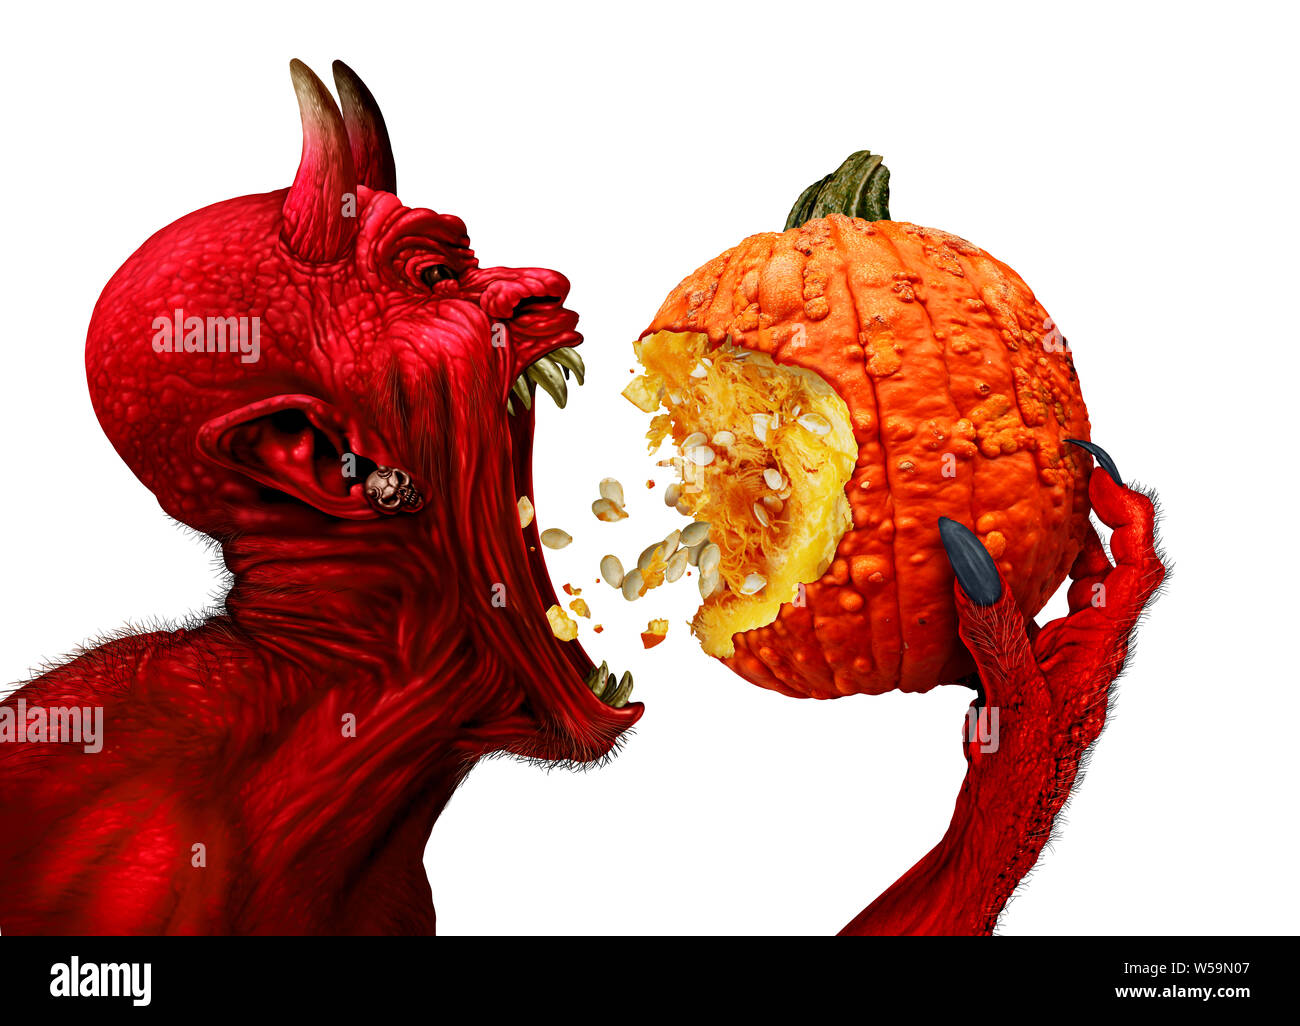 Halloween food idea as a red devil monster eating a pumpkin as a creepy seasonal snack with 3D illustration elements. Stock Photo